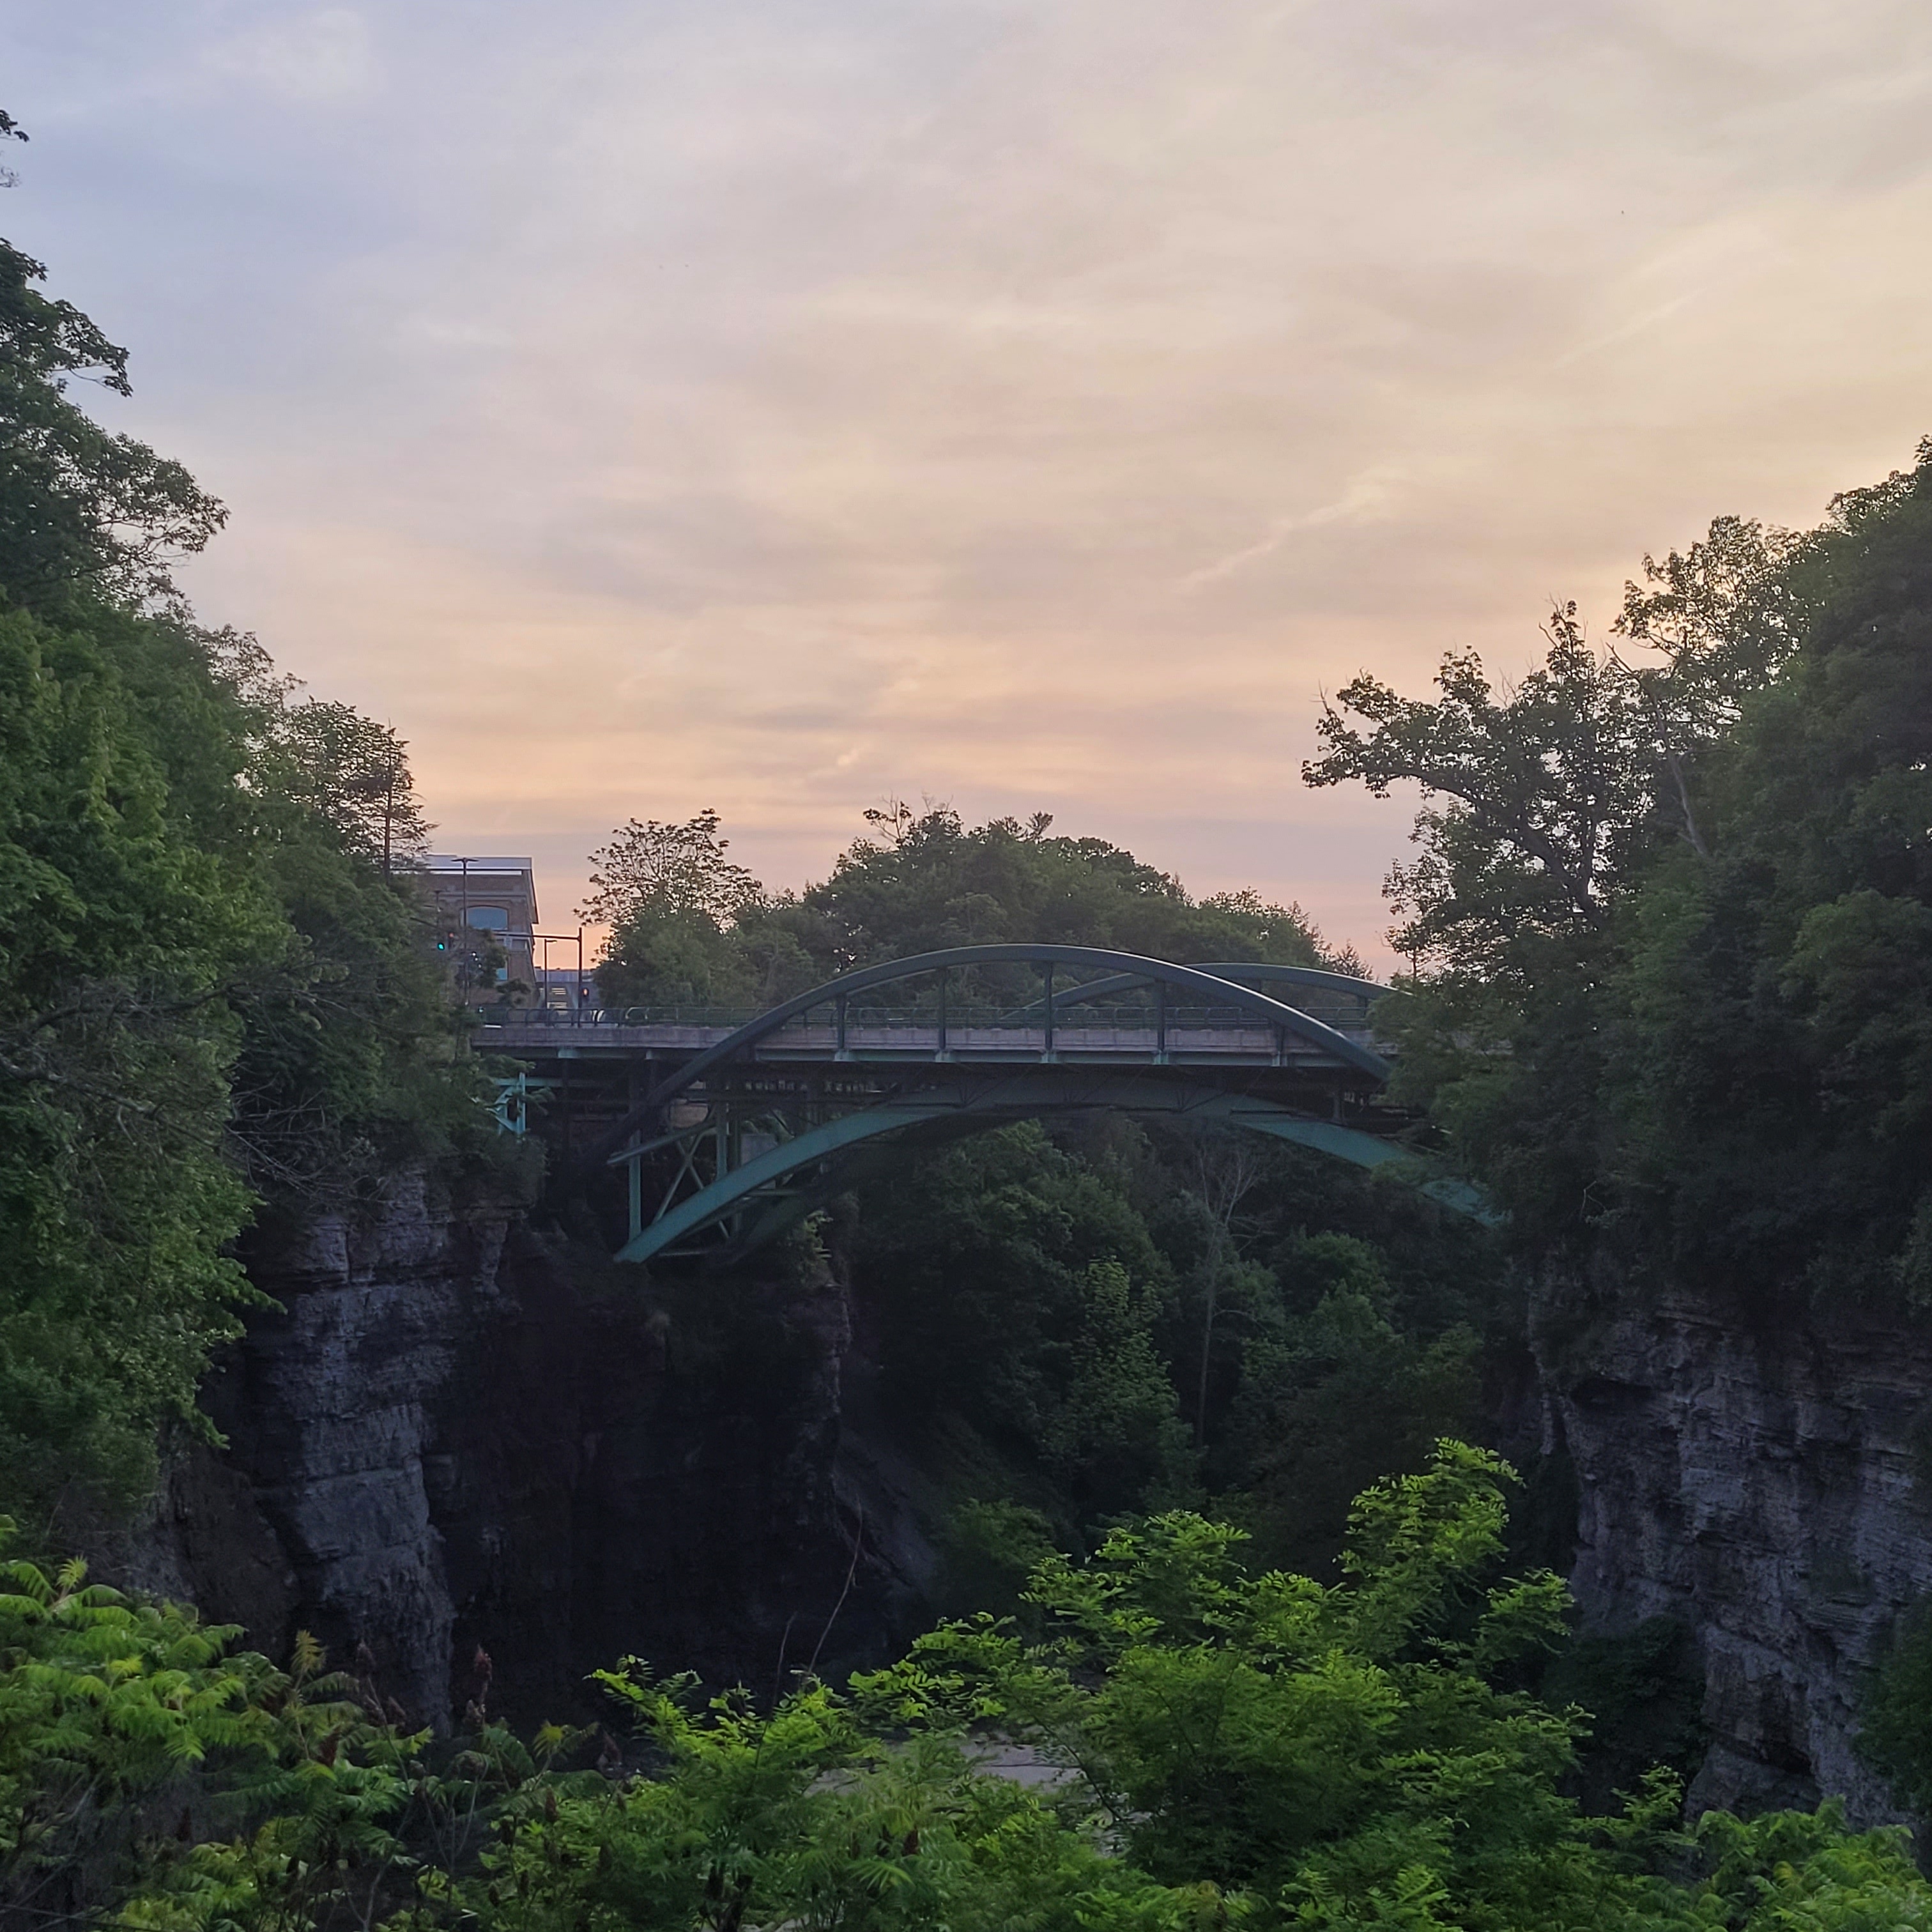 The view on the bridge overlooking the Triphammer Falls, in Ithaca, NY